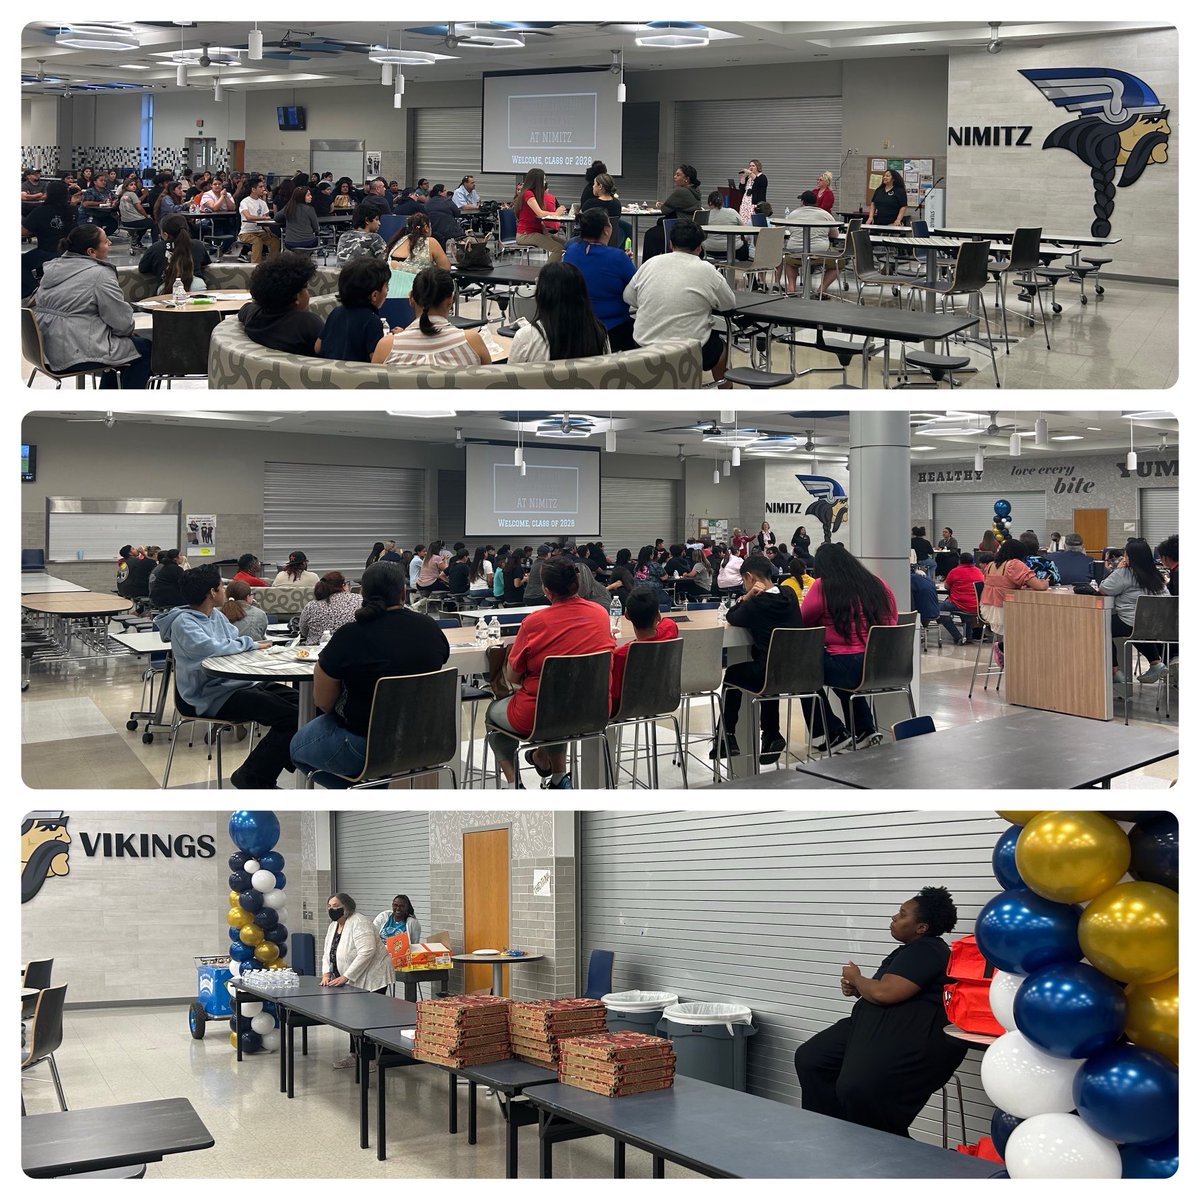 A grand event in place tonight to welcome our South Irving Collegiate at Nimitz Cohort #3 students! We are super excited to get our Vikings on board towards their journey in earning their high school diploma and Associate’s Degree. Welcome to Nimitz! #ALLN